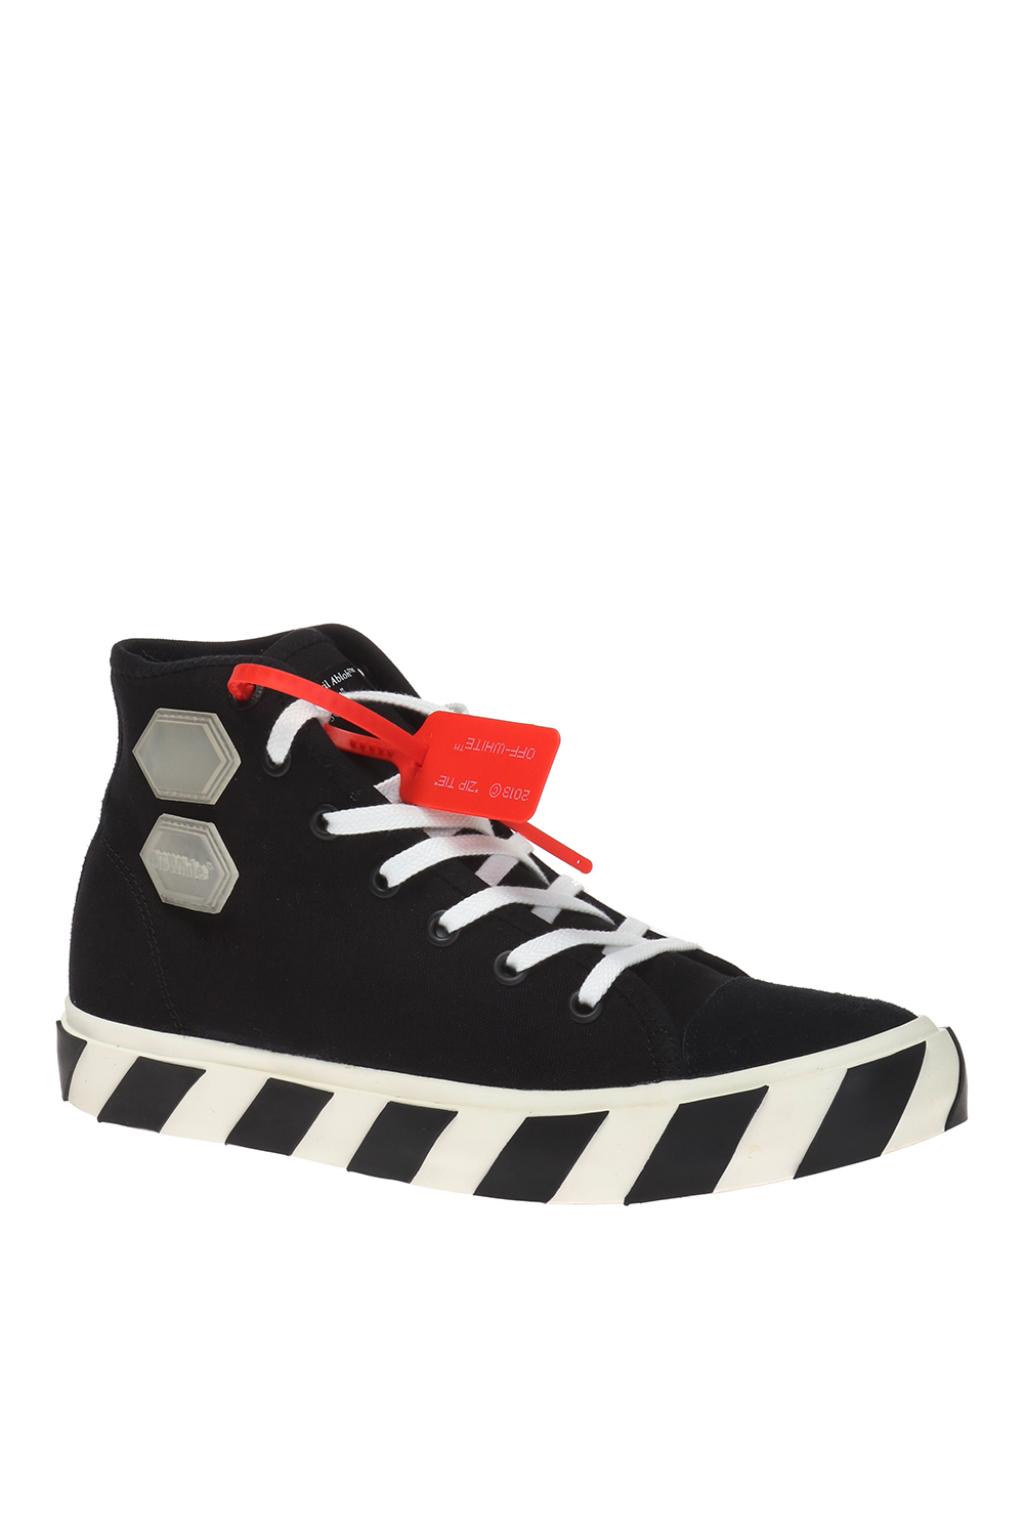 off white high top trainers